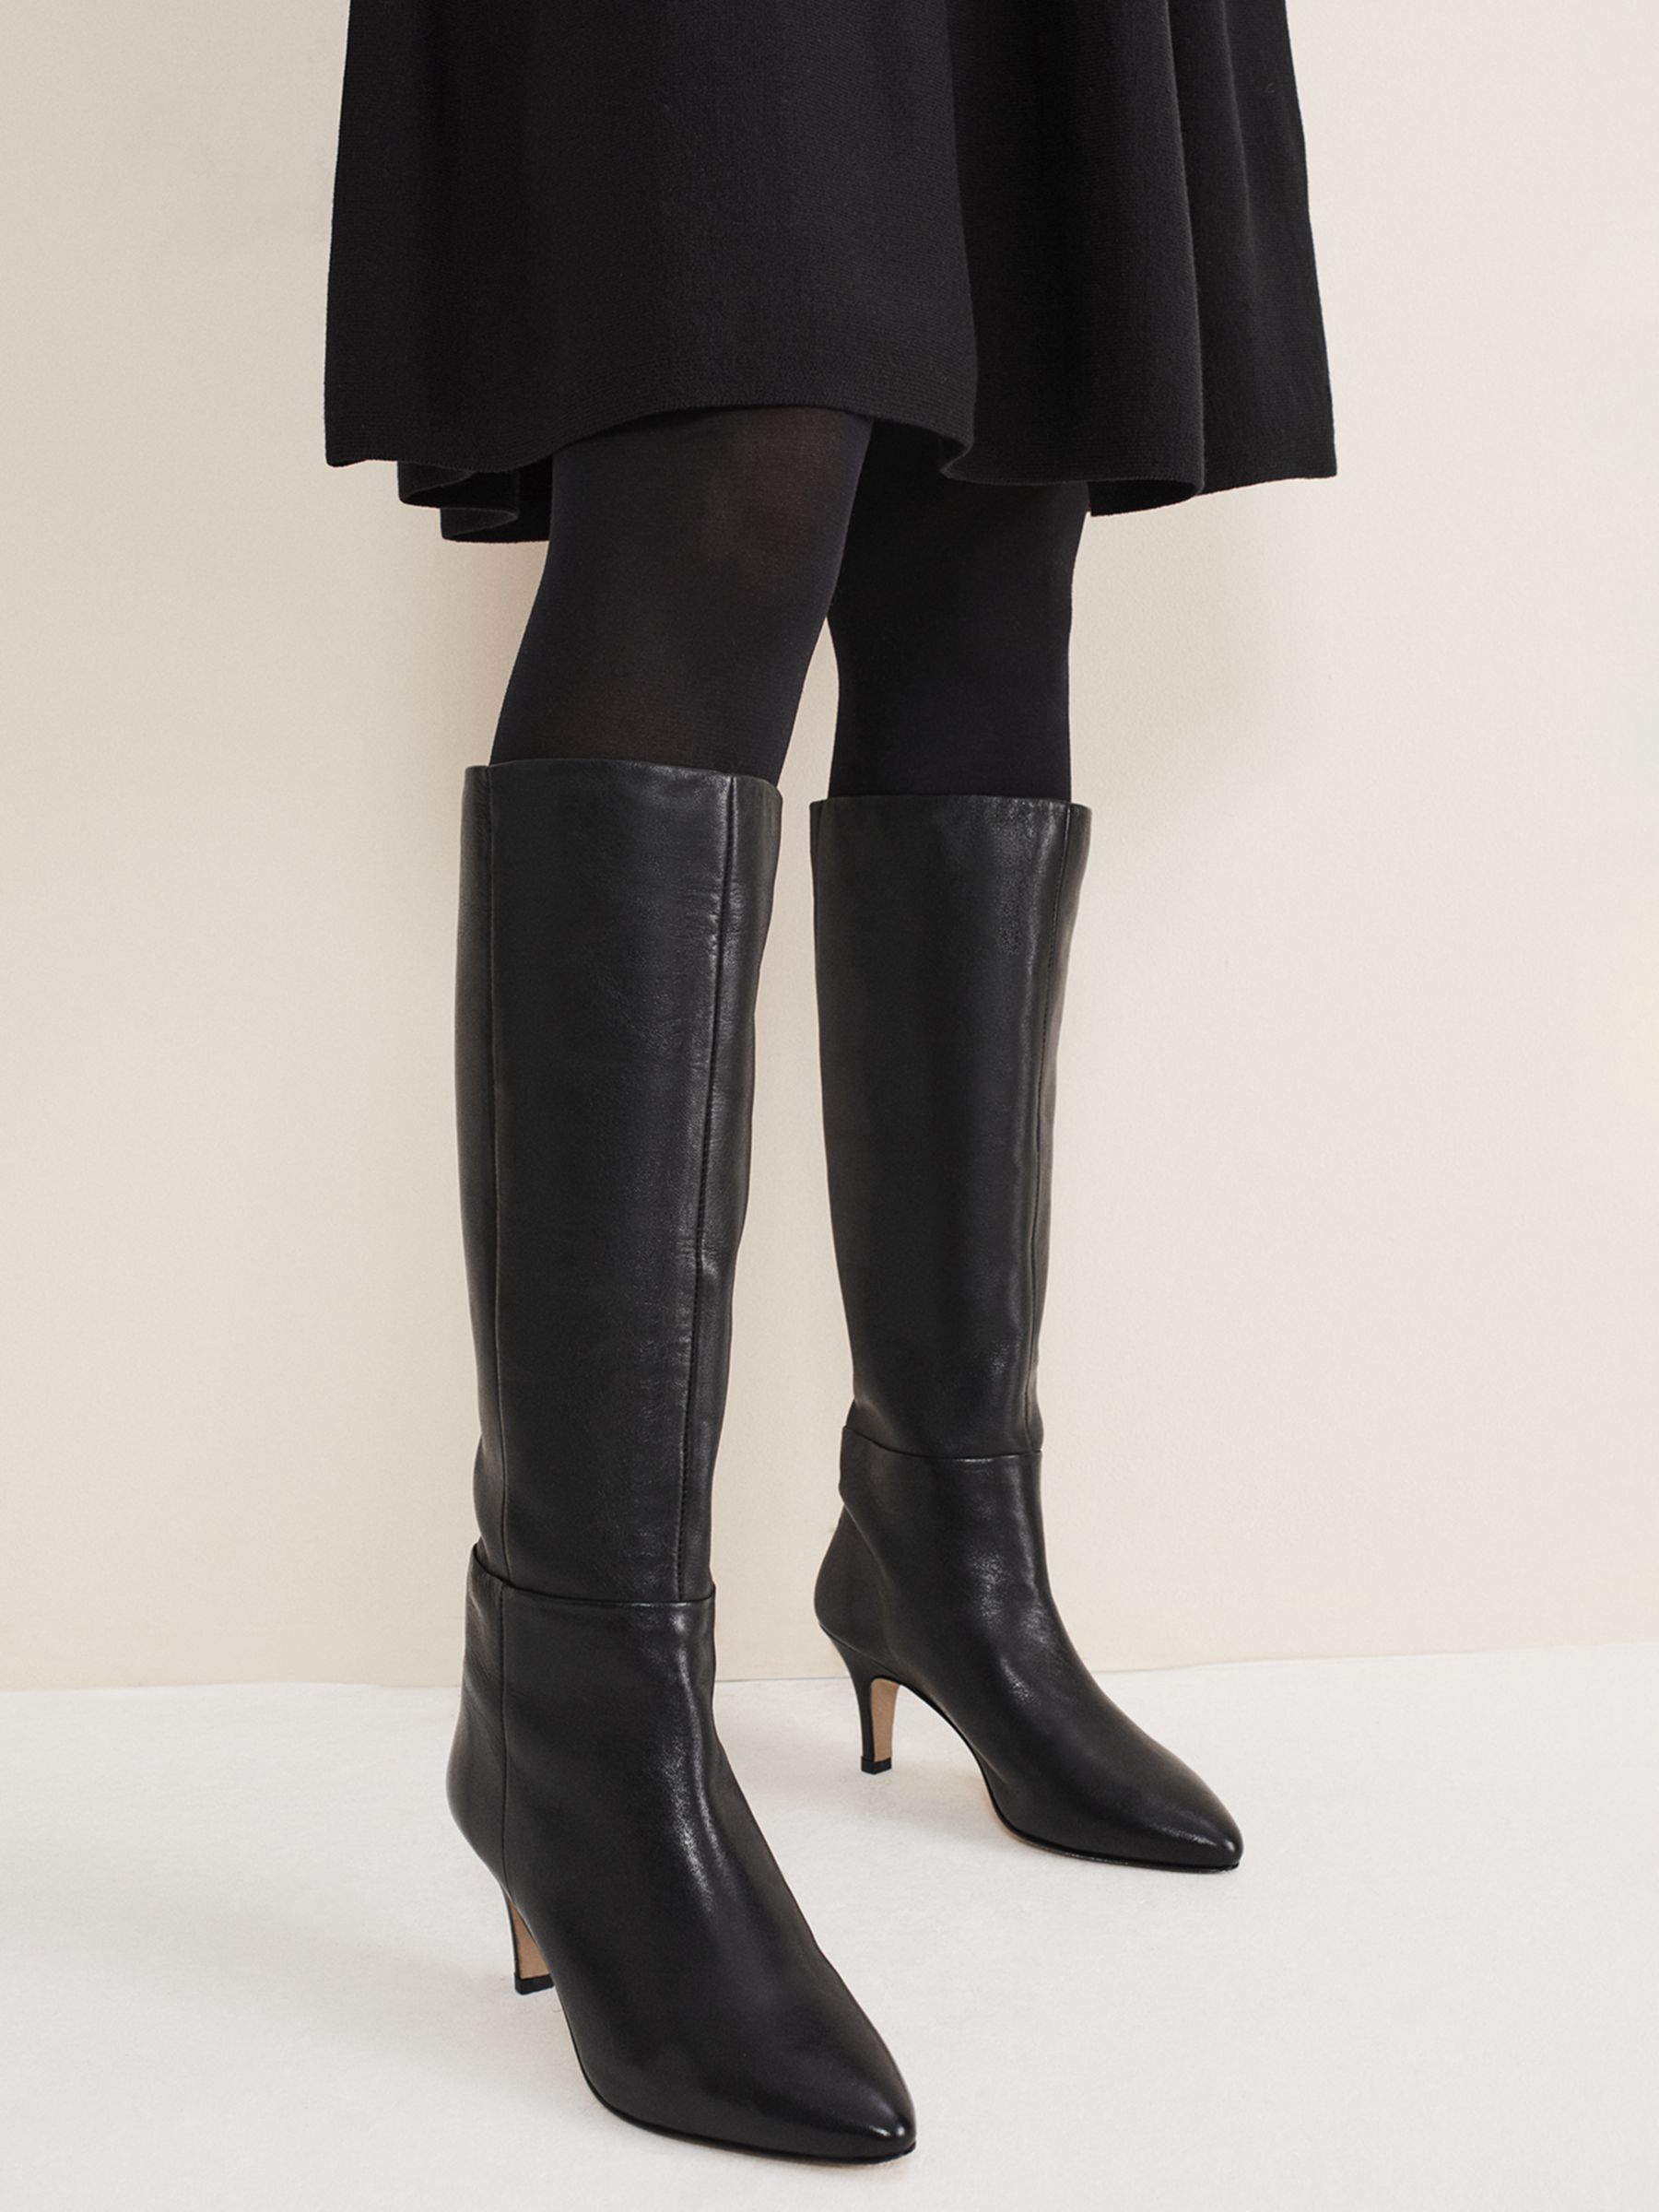 Phase Eight Pane Knee High Leather Boots, Black at John Lewis & Partners